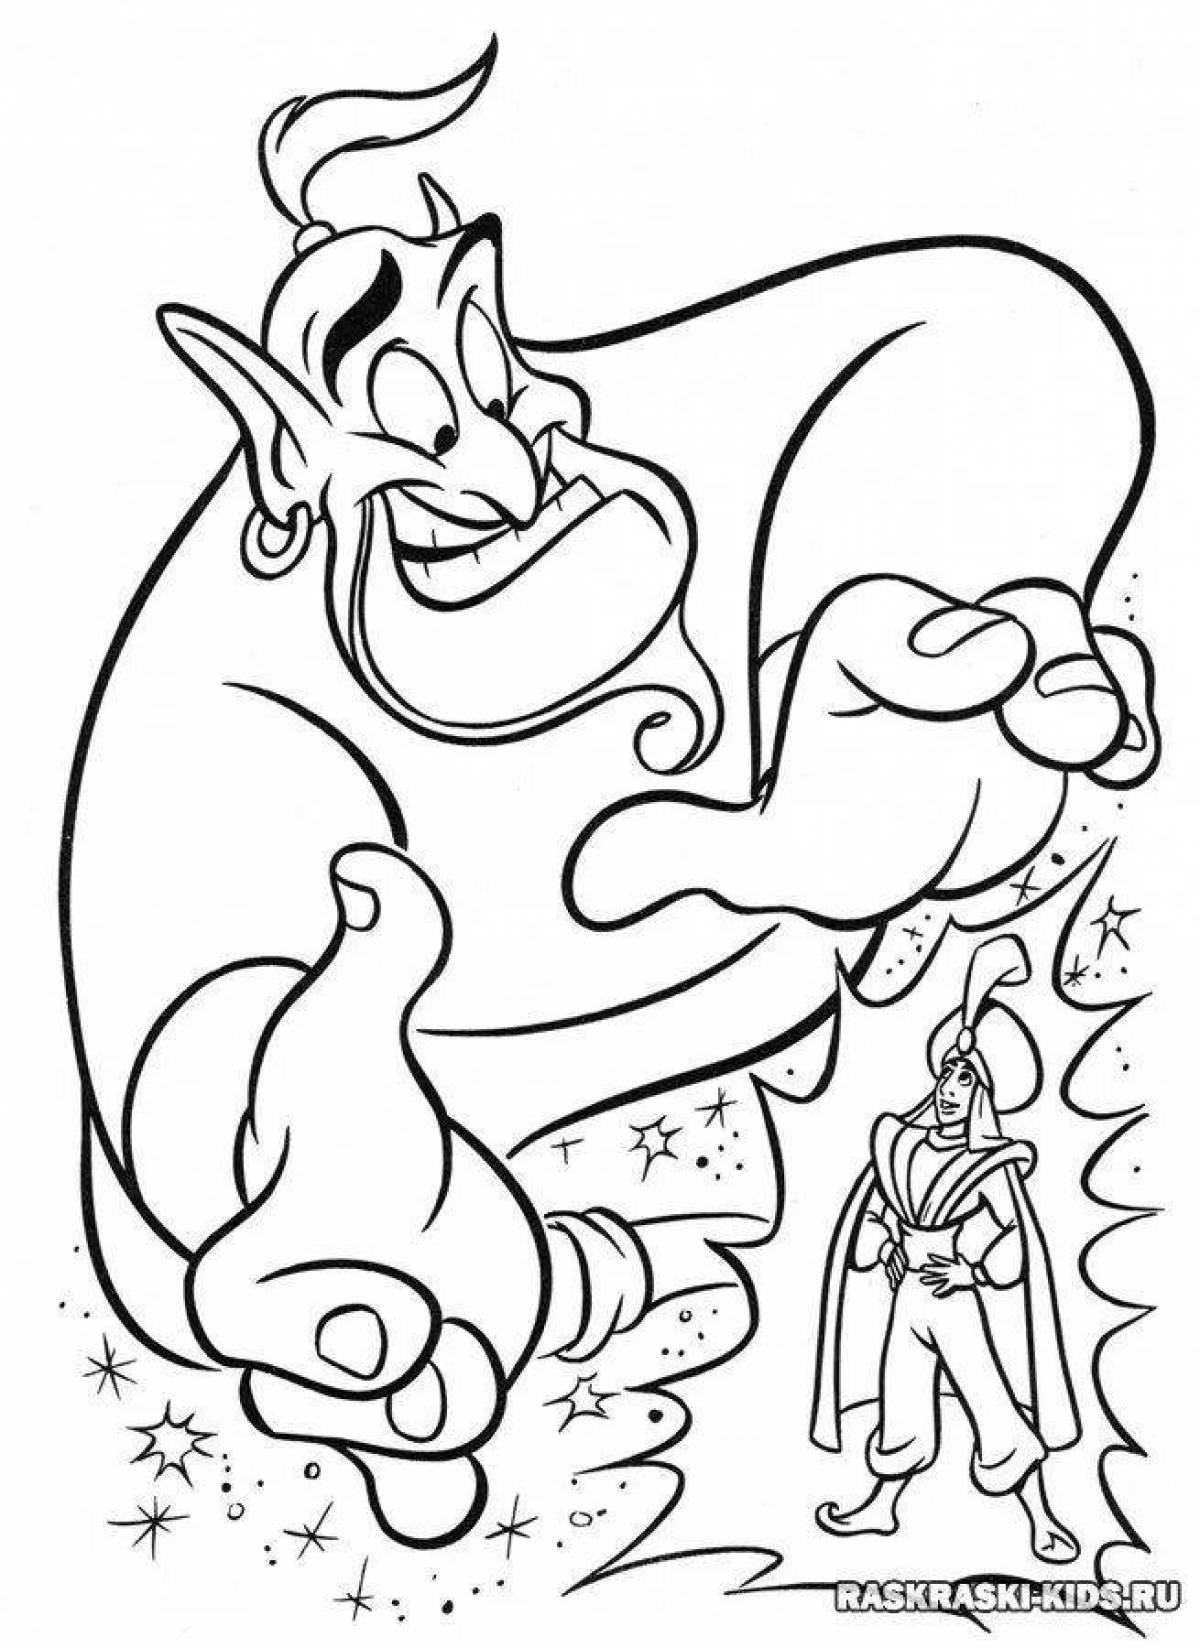 Awesome Aladdin Coloring Page